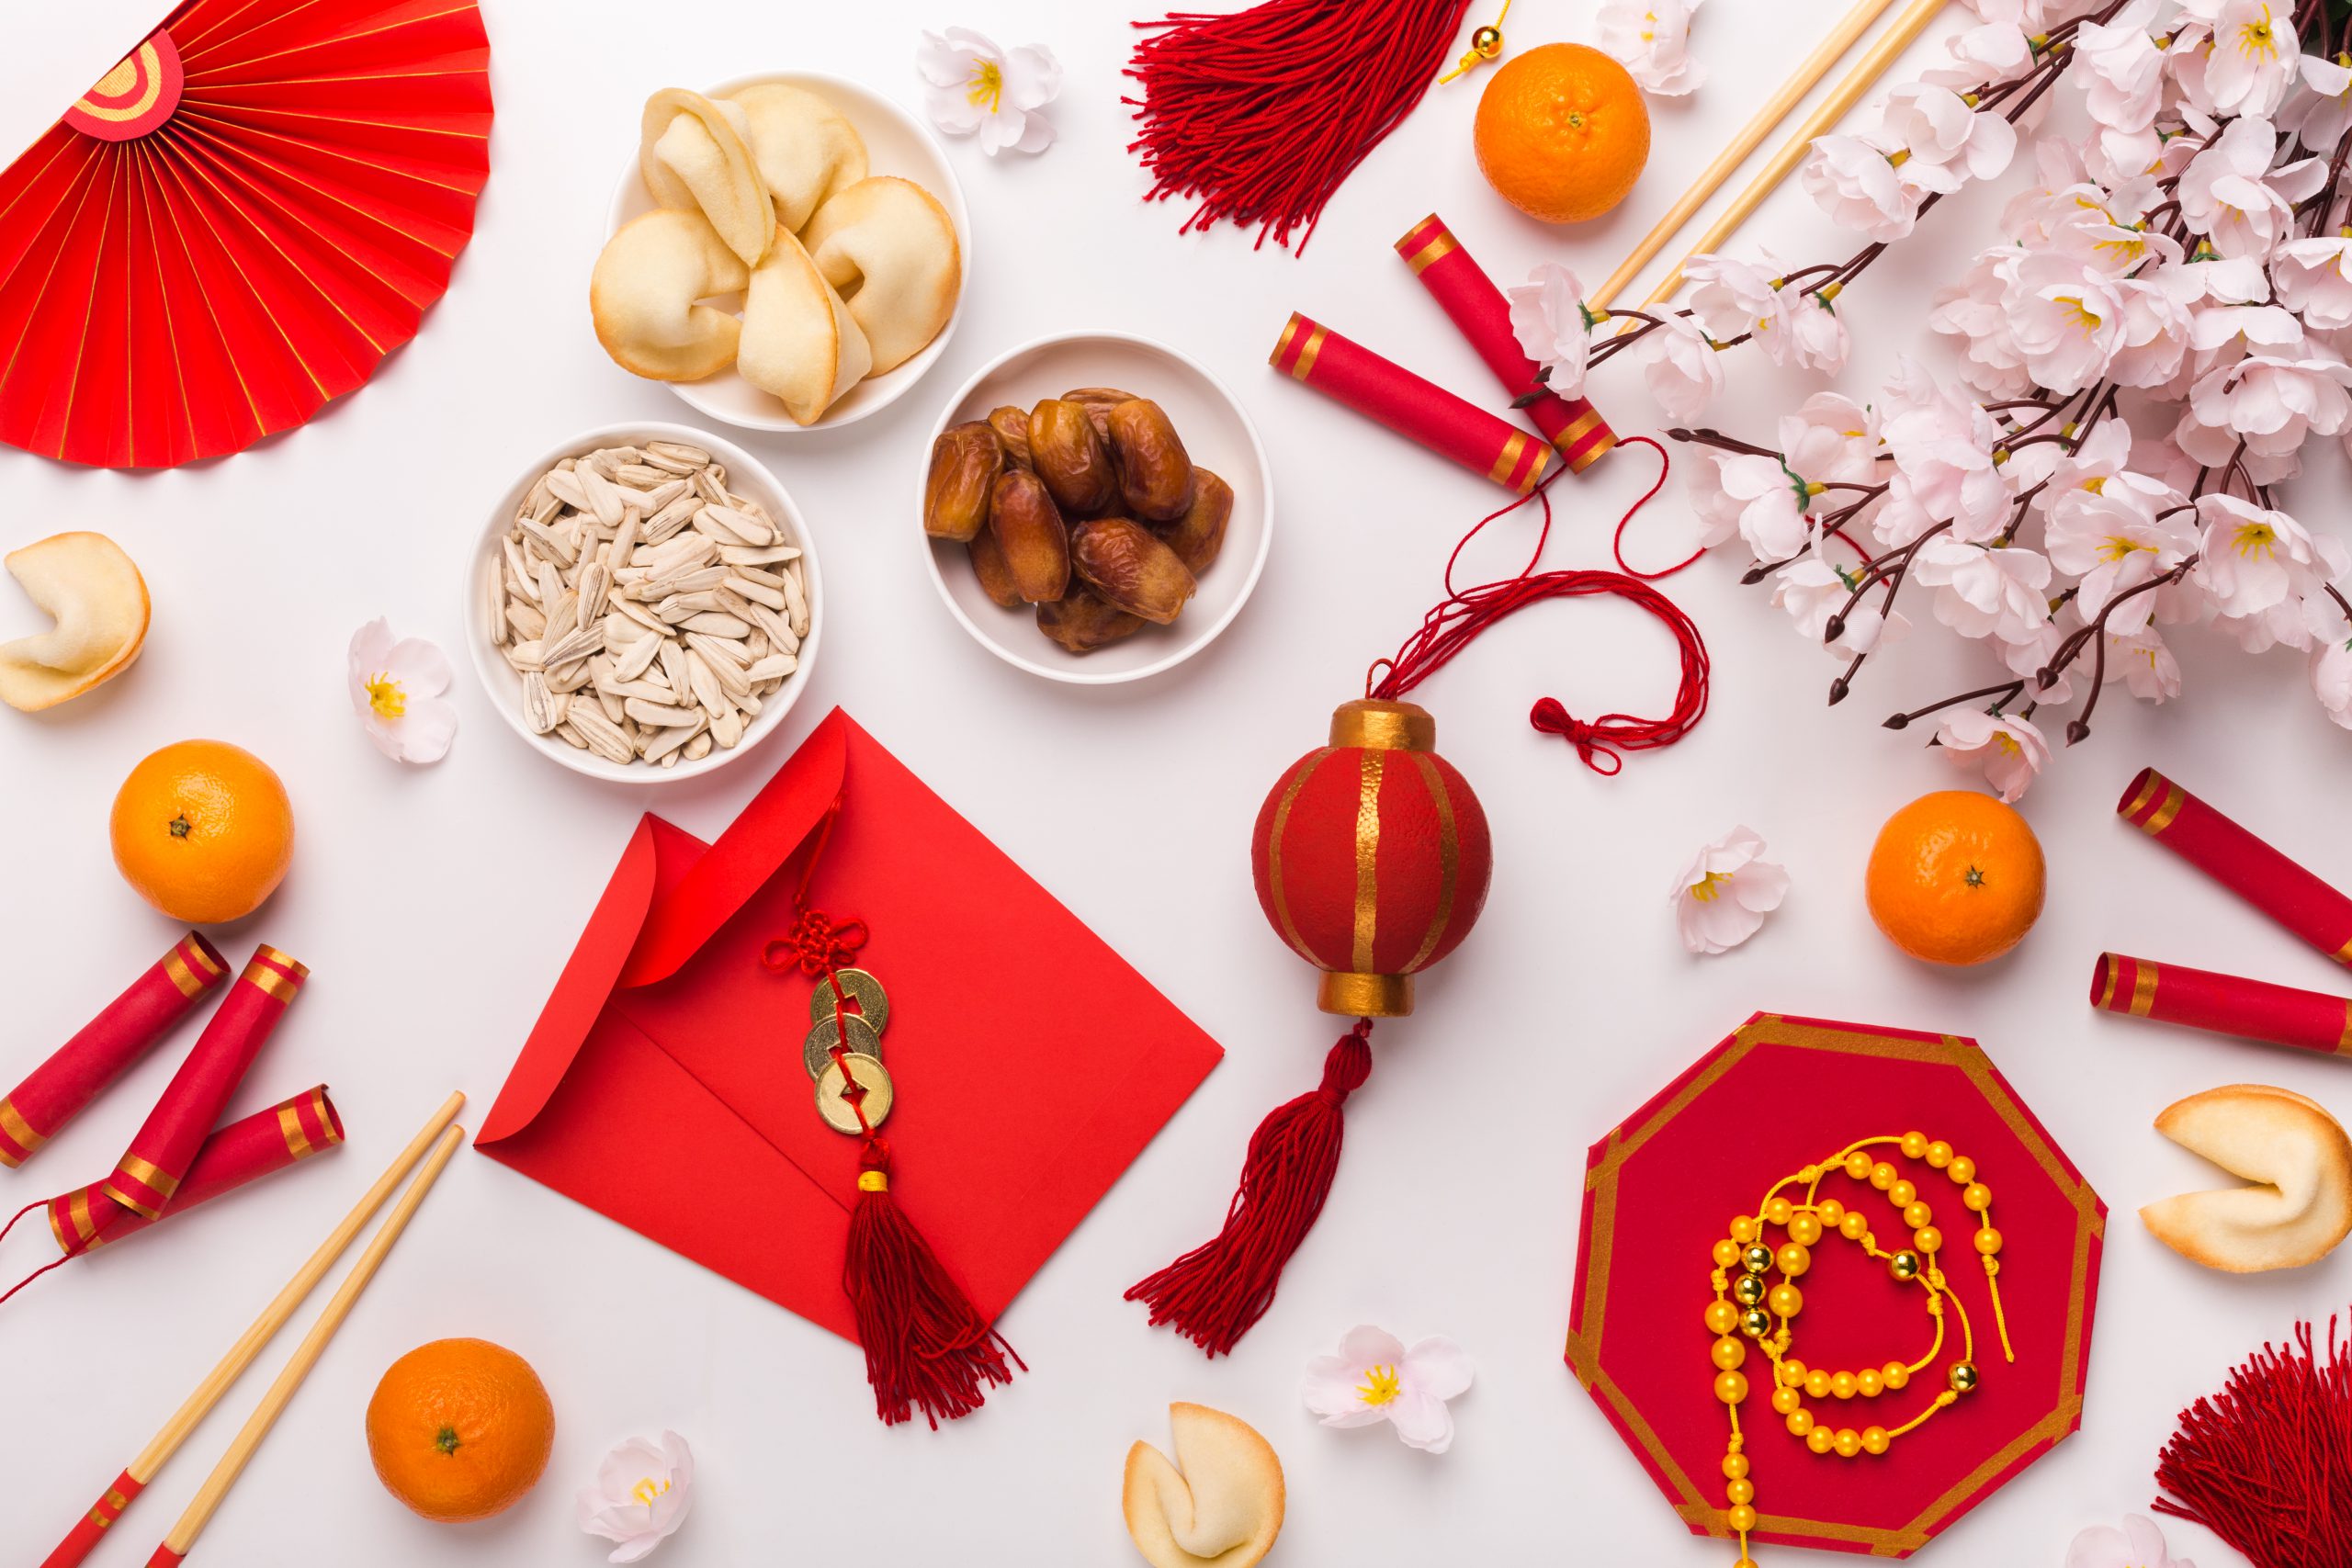 7 Creative Virtual Ways To Celebrate Chinese New Year 2021 With Your Company.